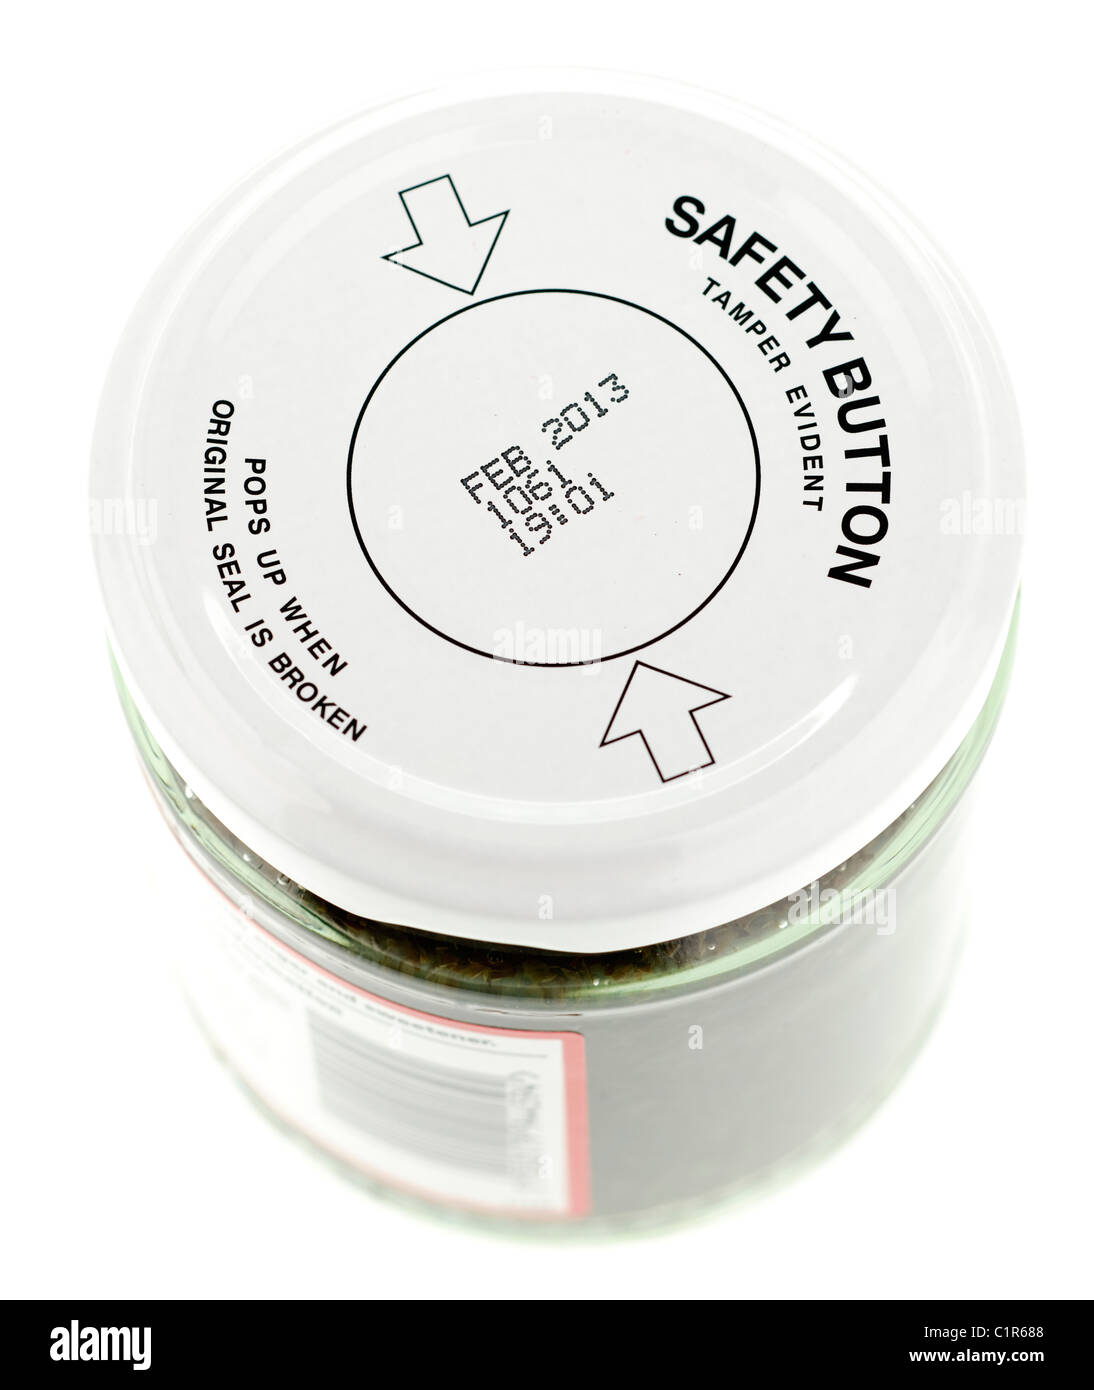 Safety button lid on a glass jar Stock Photo